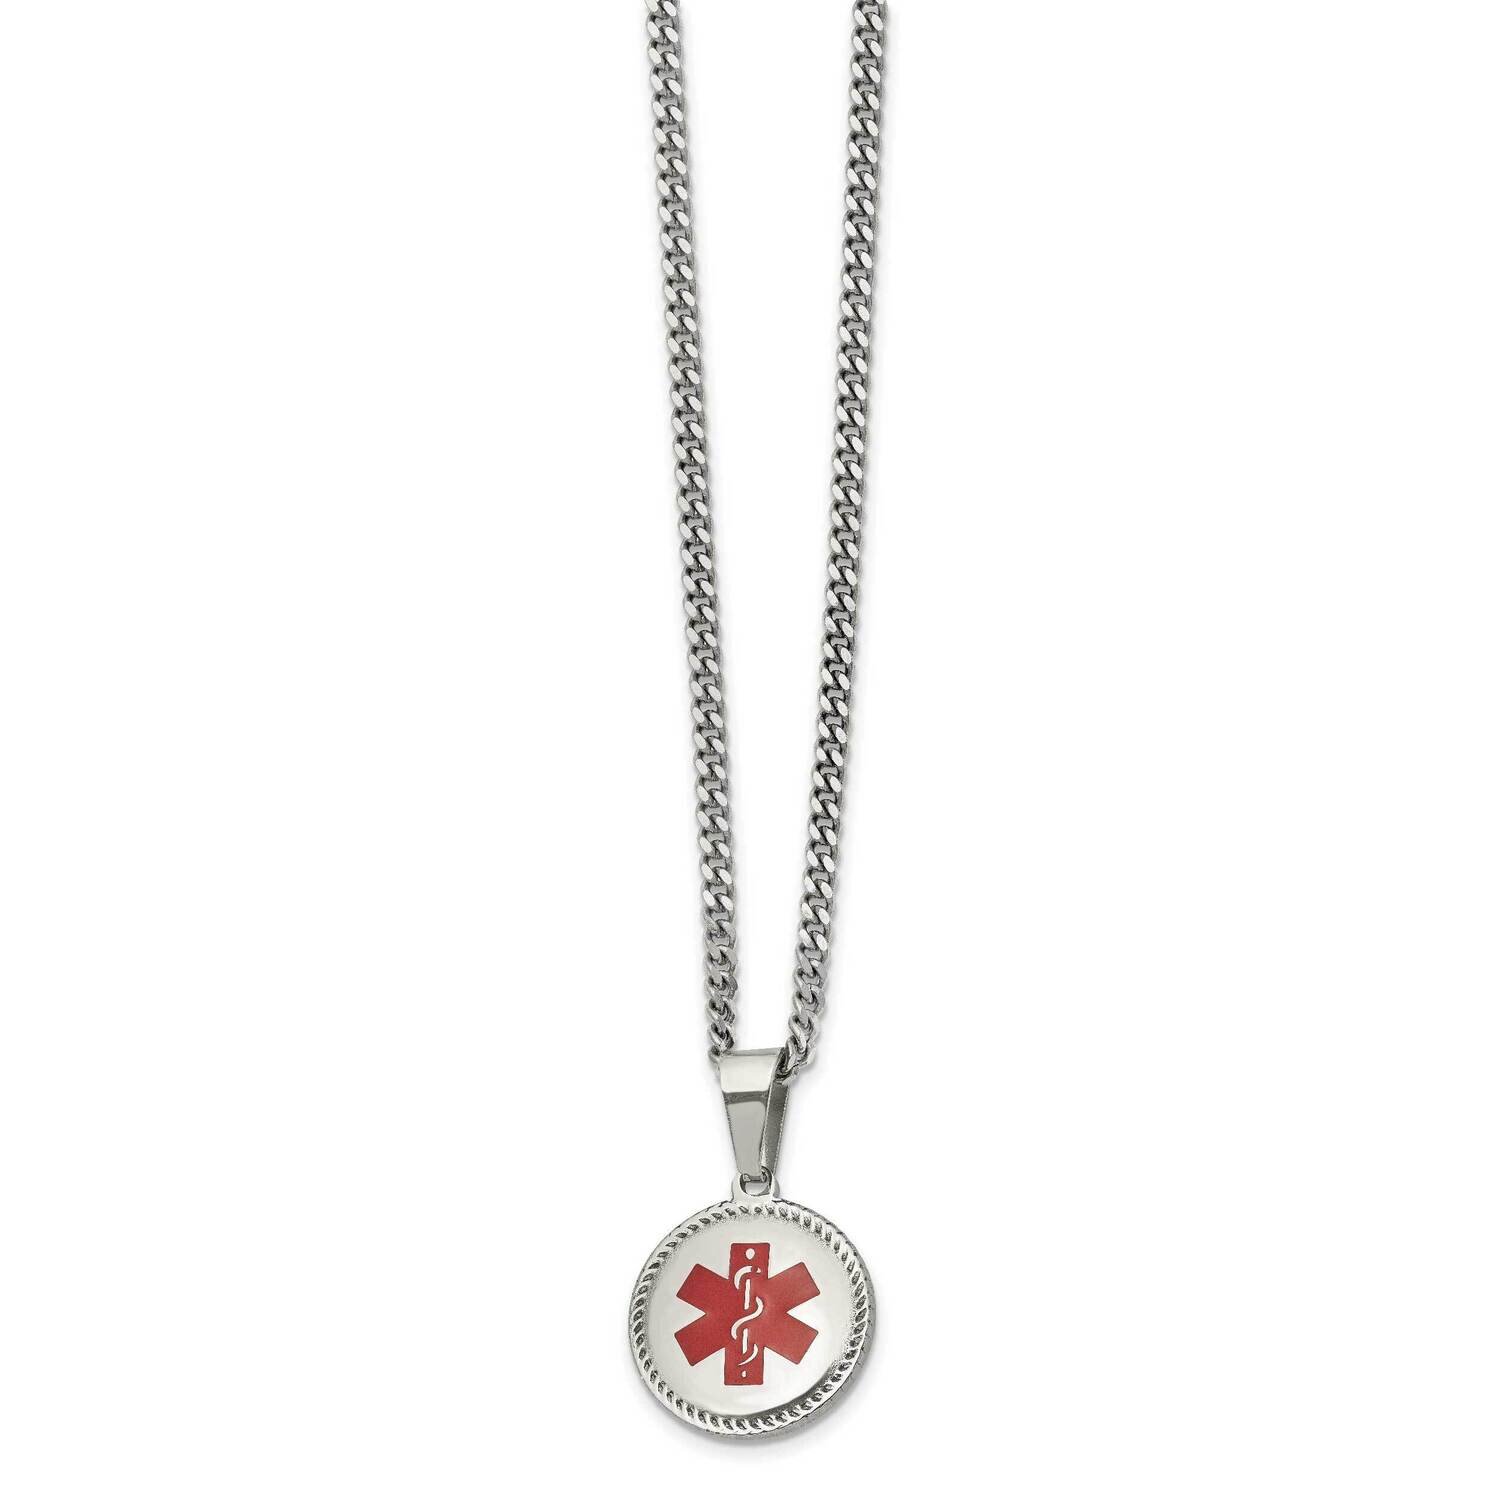 Red Enamel Circle Medical Id 20 Inch Necklace Stainless Steel Polished SRN2758-20